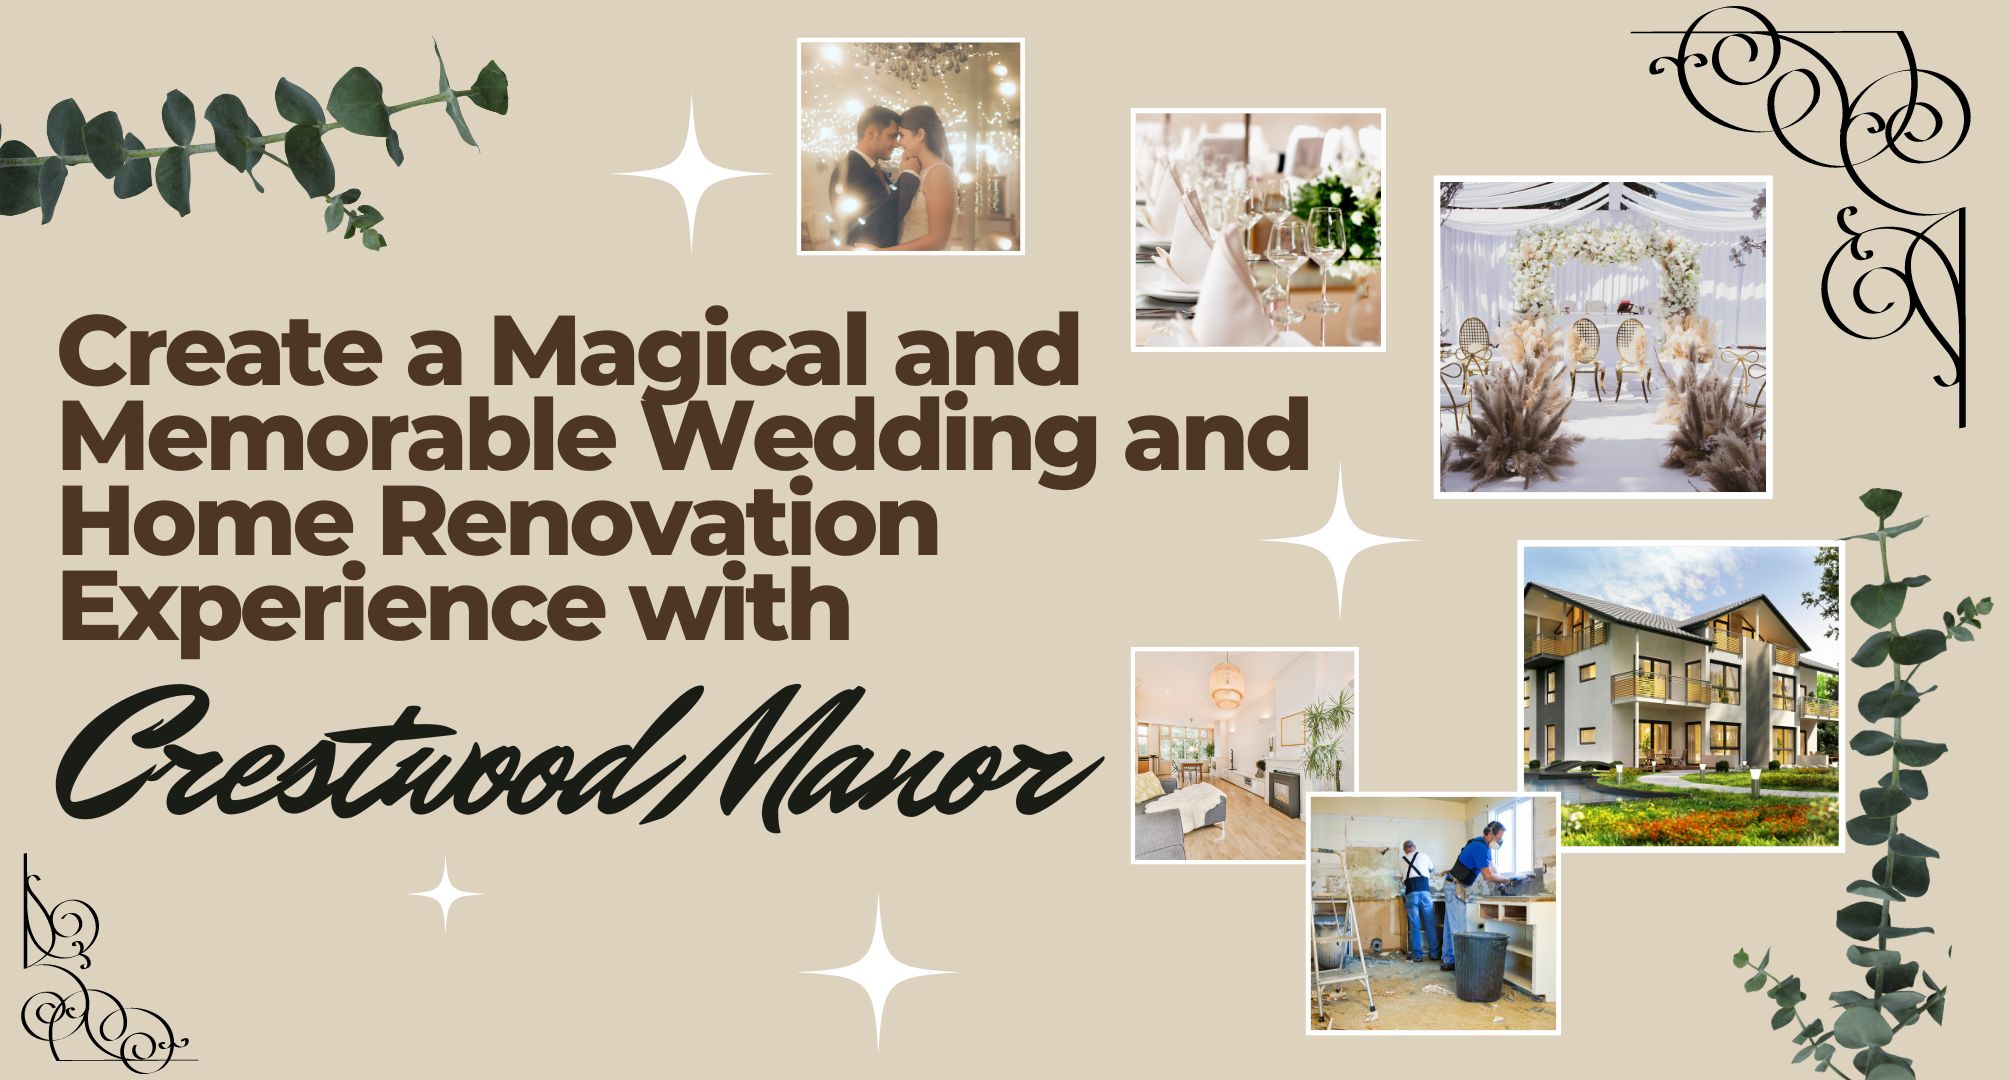 Create a Magical and Memorable Wedding and Home Renovation Experience with Crestwood Manor